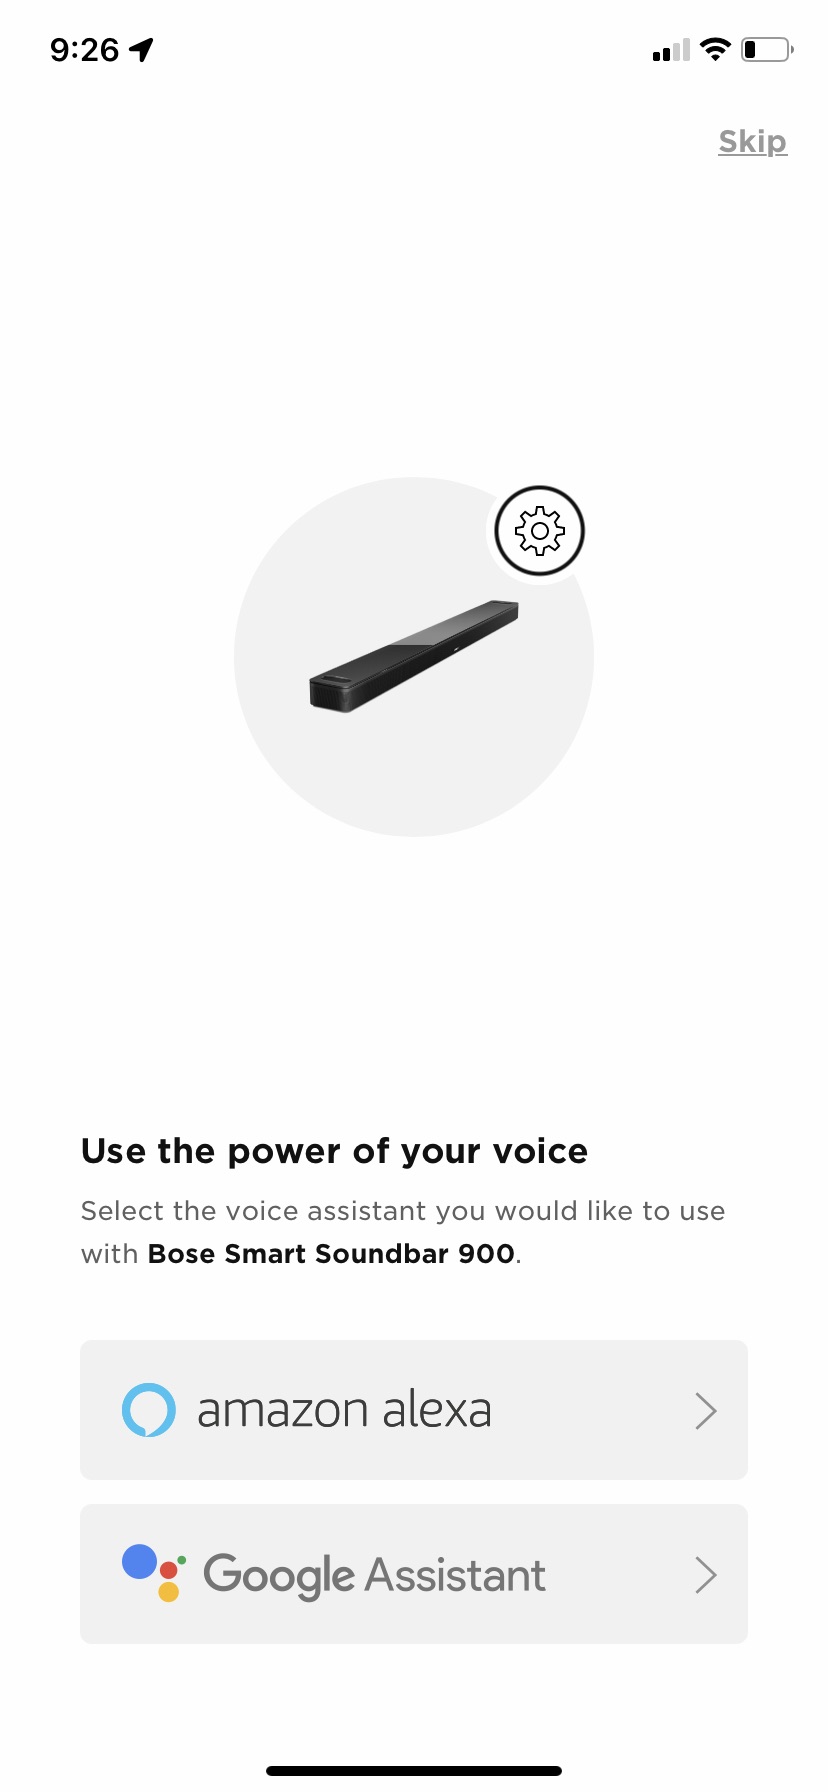 Bose Smart Digital review: adds to Atmos immersion | Soundbar Trends 900 the